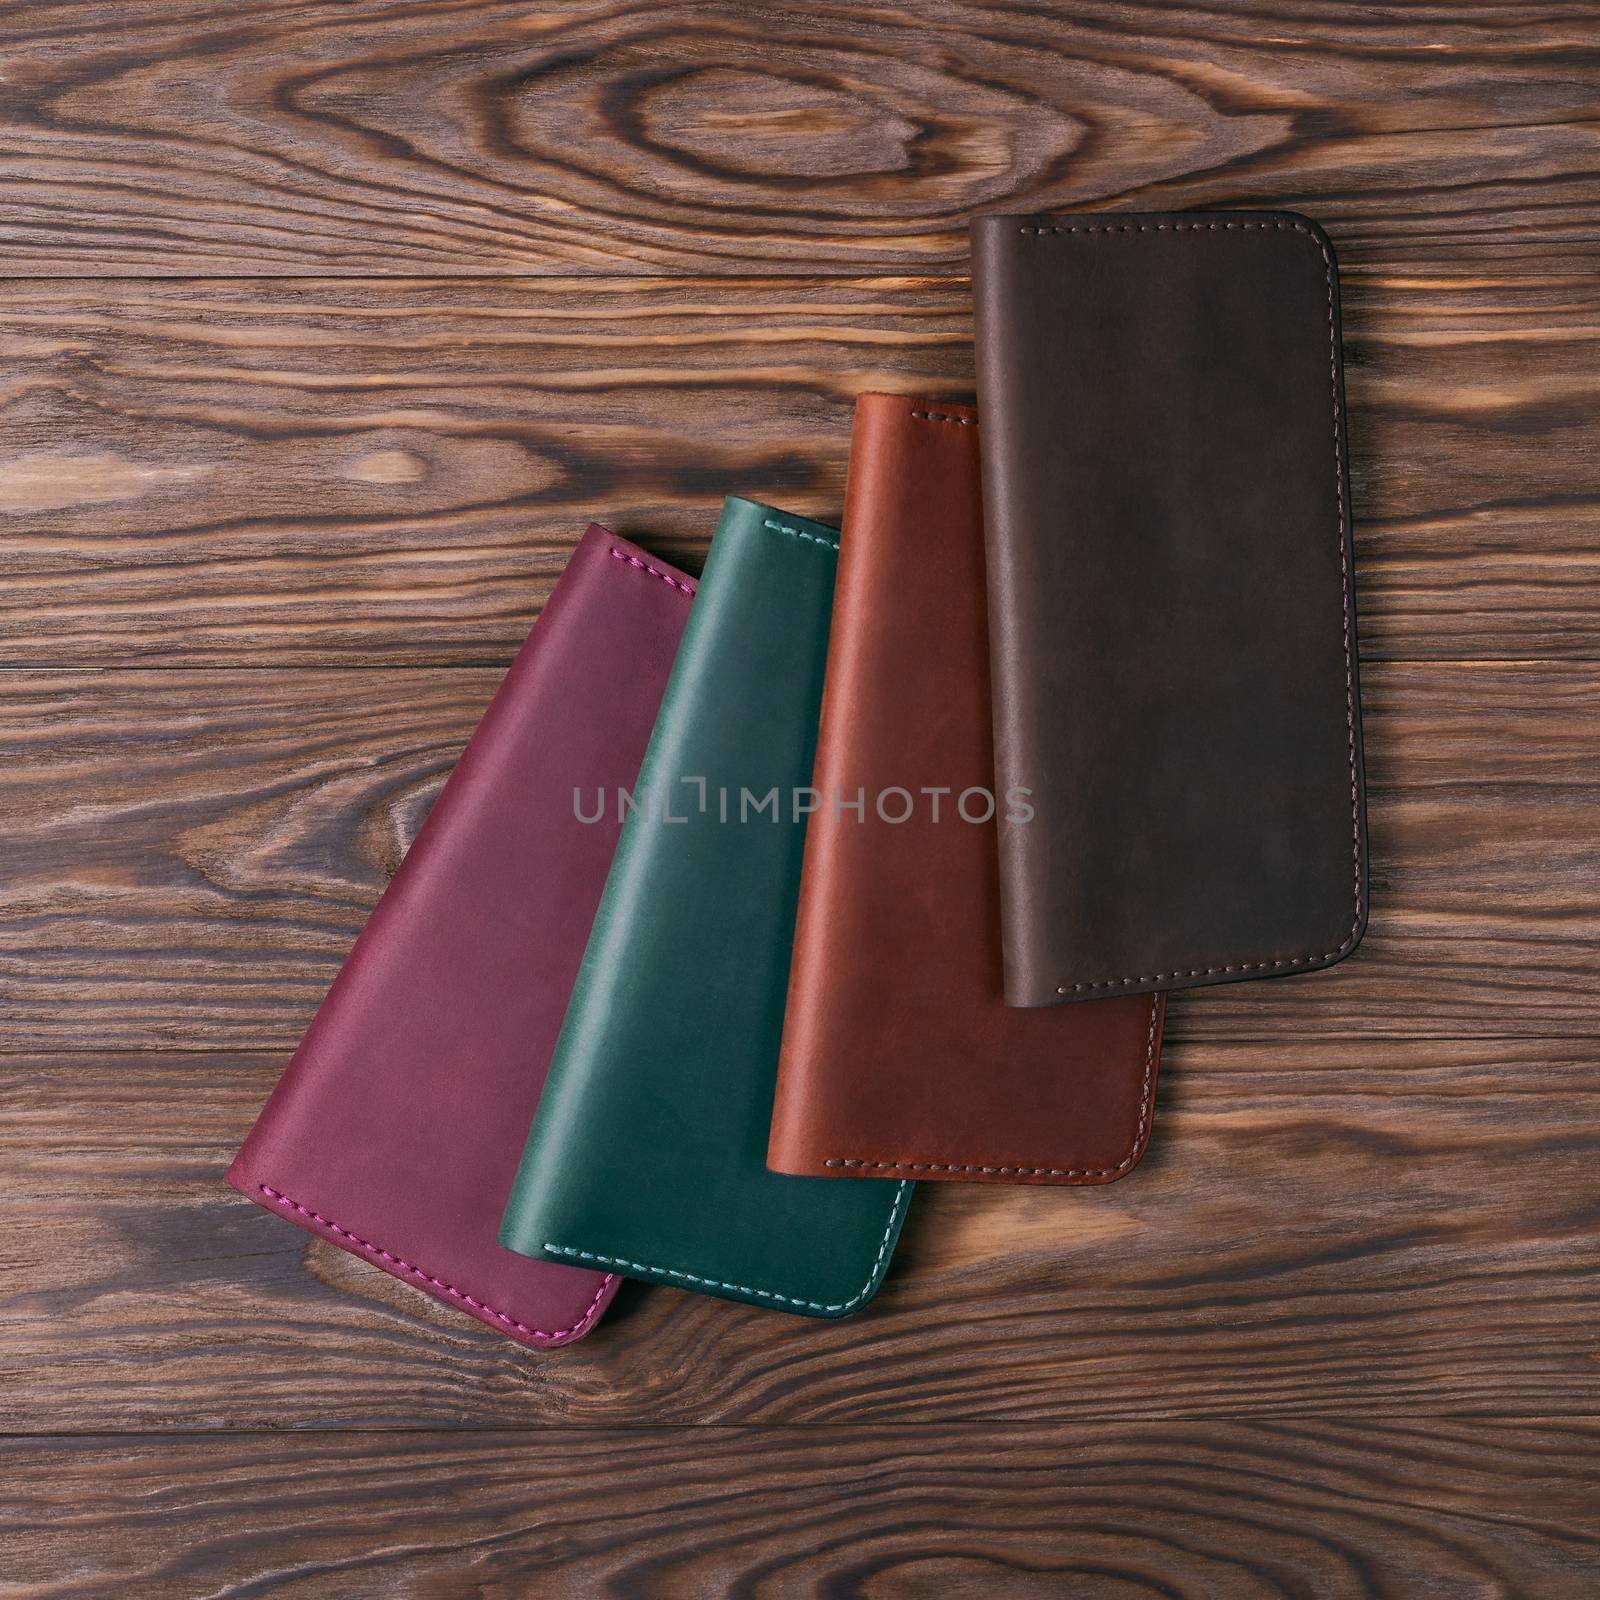 Four handmade leather porte-monnaie on wooden textured background. Up to down view. Stock photo of luxury accessories. by alexsdriver